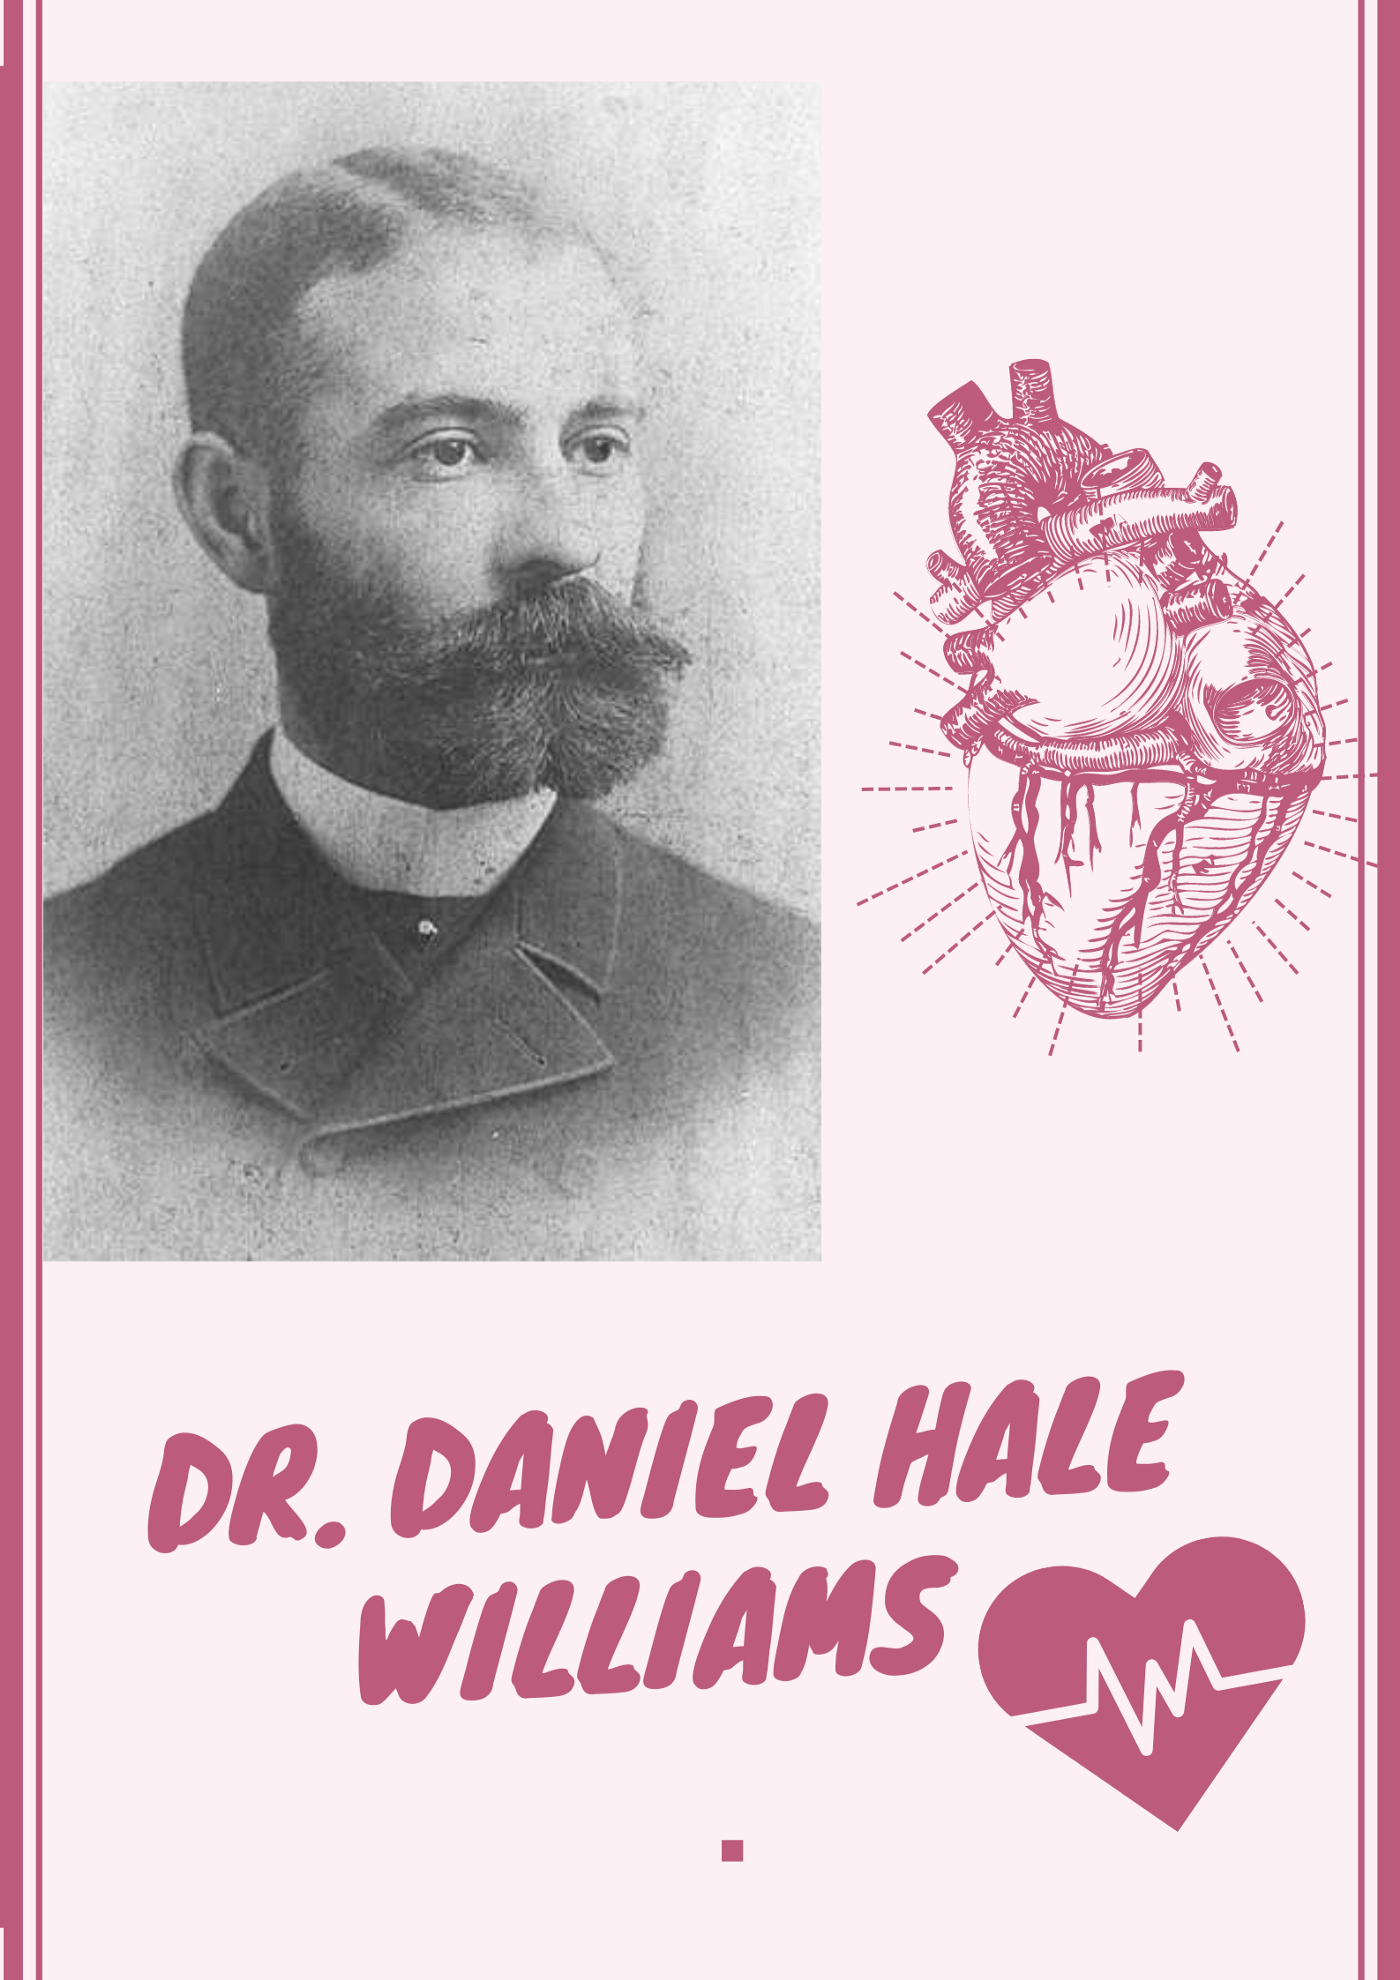 How daniel hale williams heart surgery demonstrated black brilliance by allison wiltz the collector